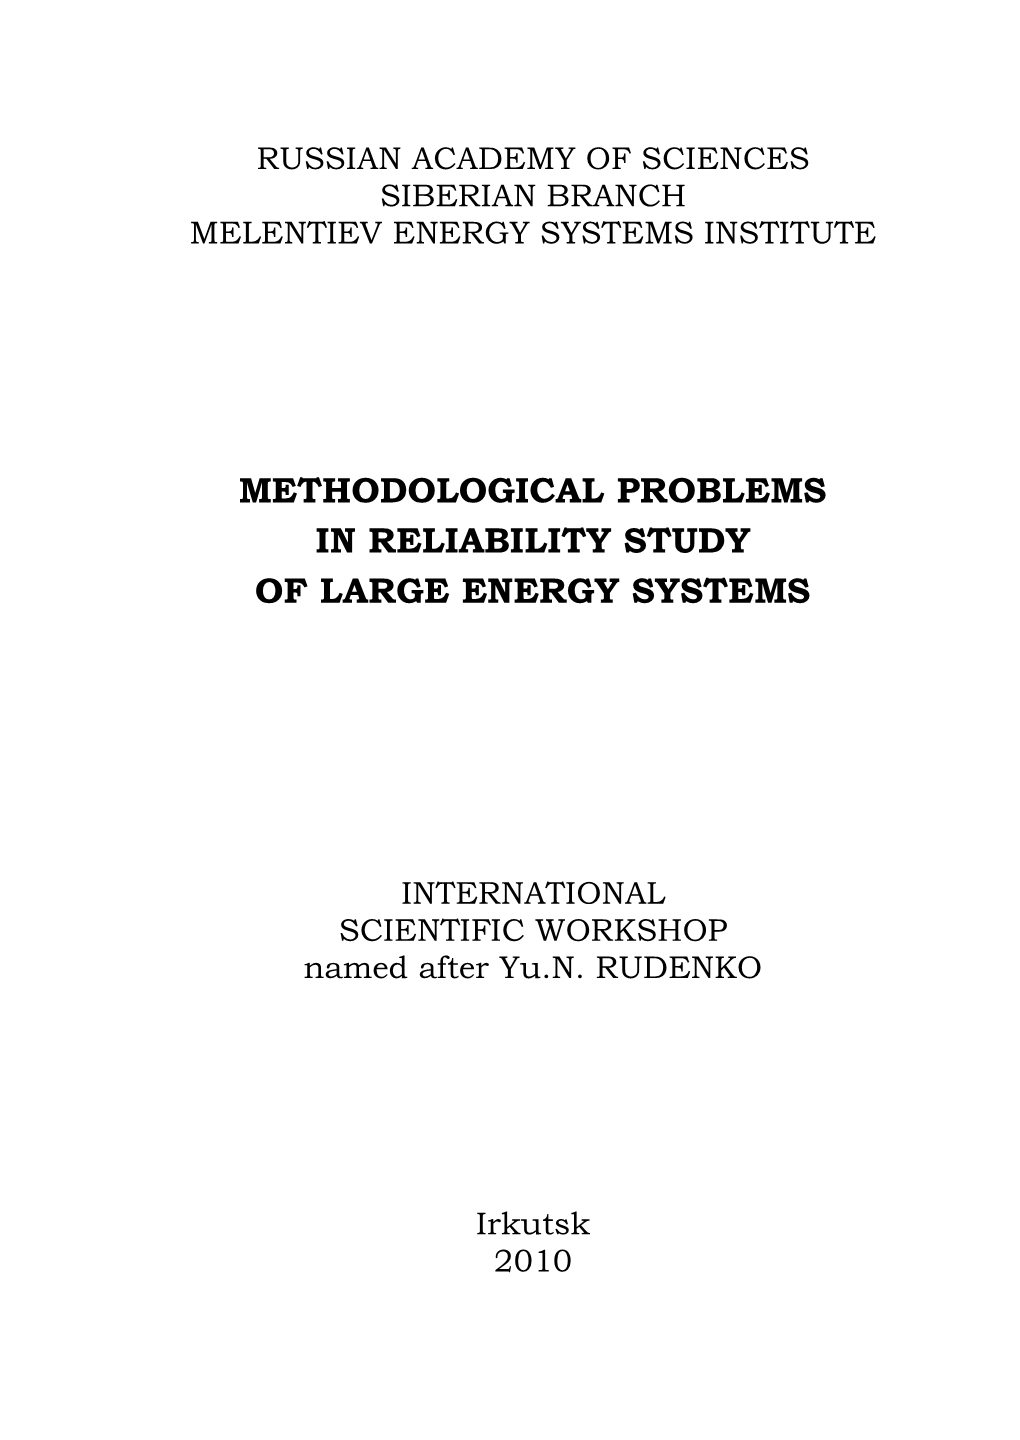 Methodological Problems in Reliability Study of Large Energy Systems